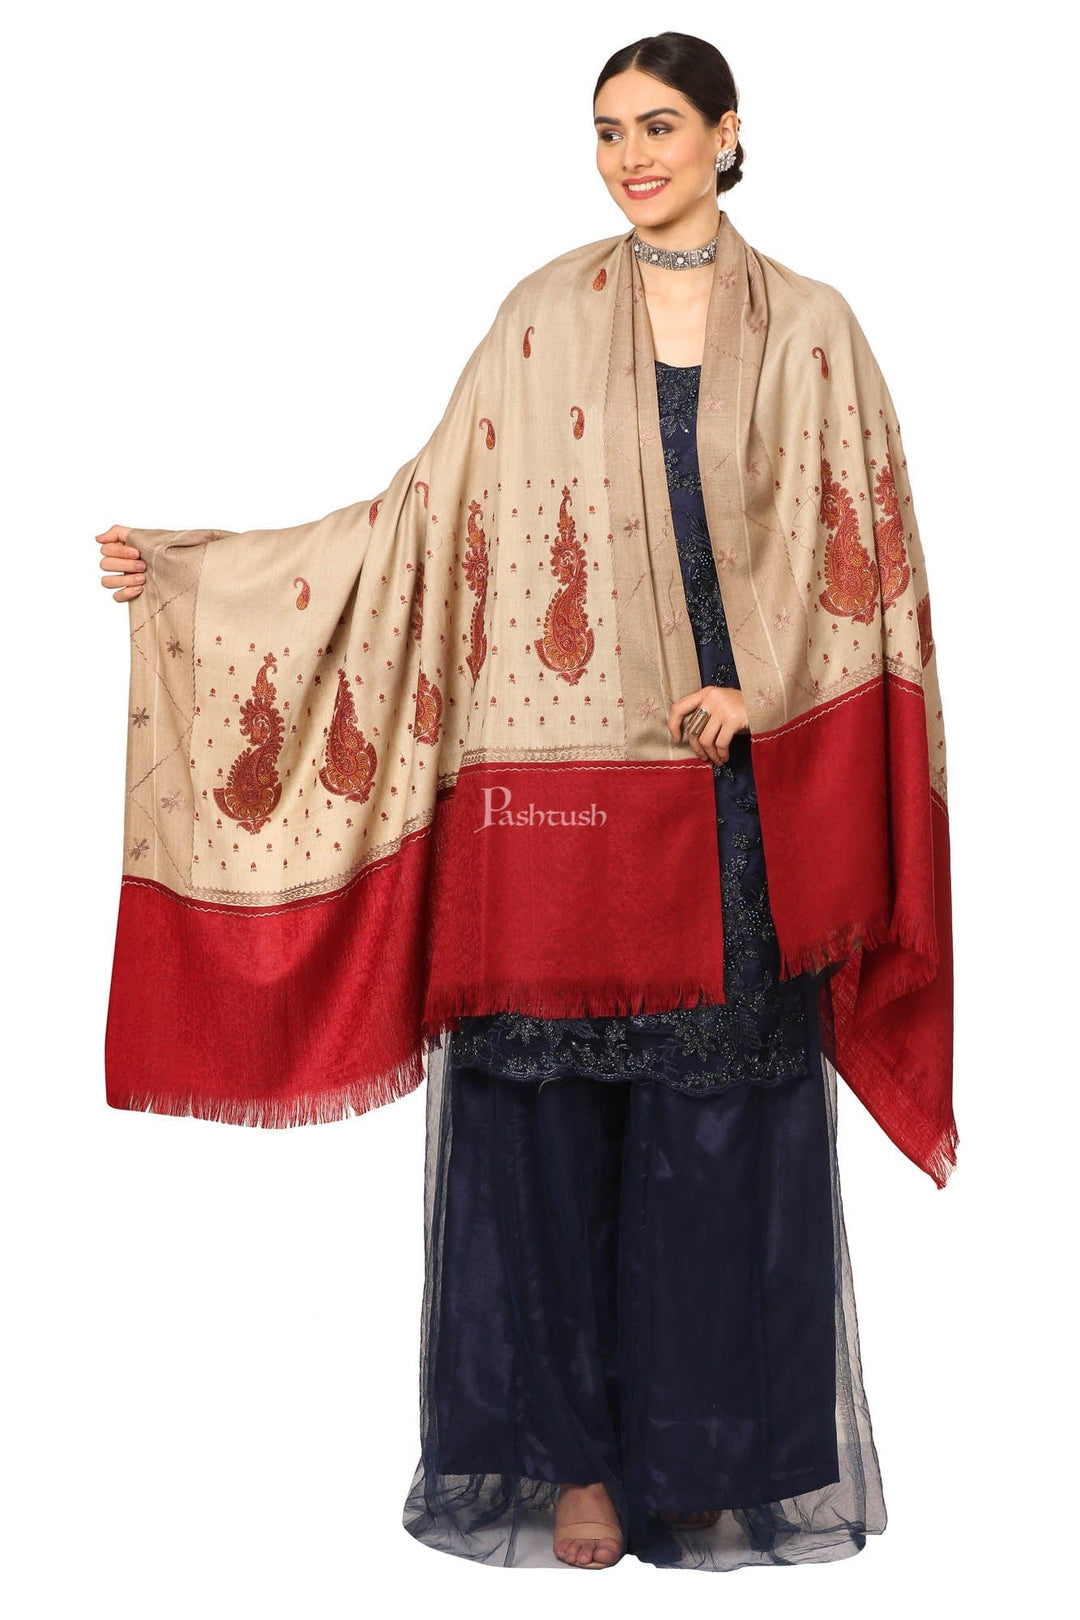 Pashtush India Womens Shawls Pashtush Womens, Embroidery Shawl With Palla Deisgn, Bridal Soft Wool Collection - Multi-Coloured